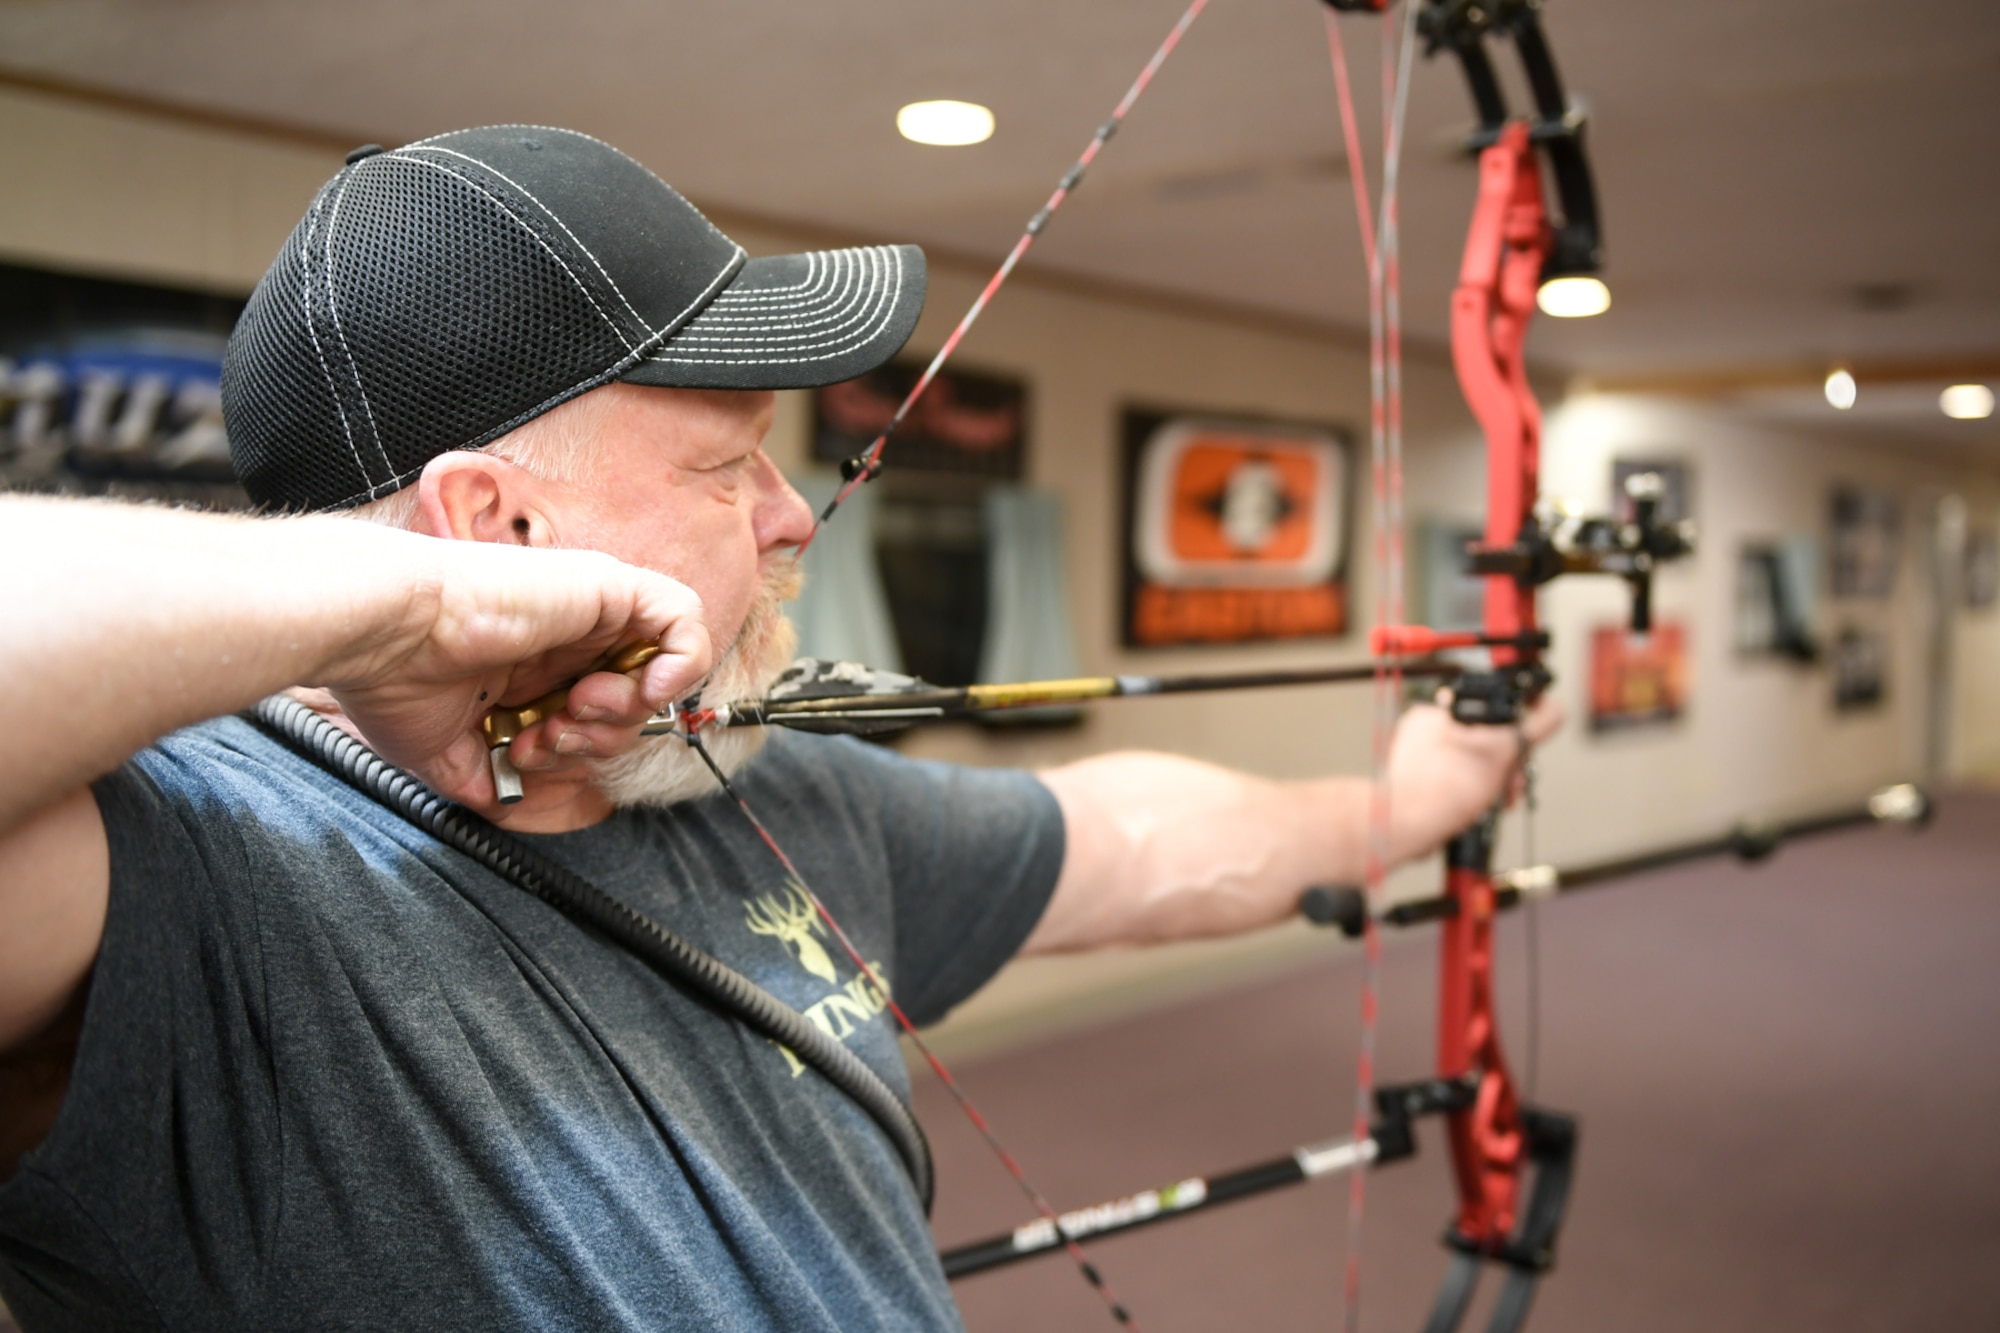 Wayne Willey aims his compound bow at a three-spot target during a Hill Archery Club league night Dec. 13, 2018, at Hill Air Force Base, Utah. Besides access to the clubhouse and ranges 24/7, Hill club members are also invited to participate in several archery events throughout the year. (U.S. Air Force photo by Cynthia Griggs)